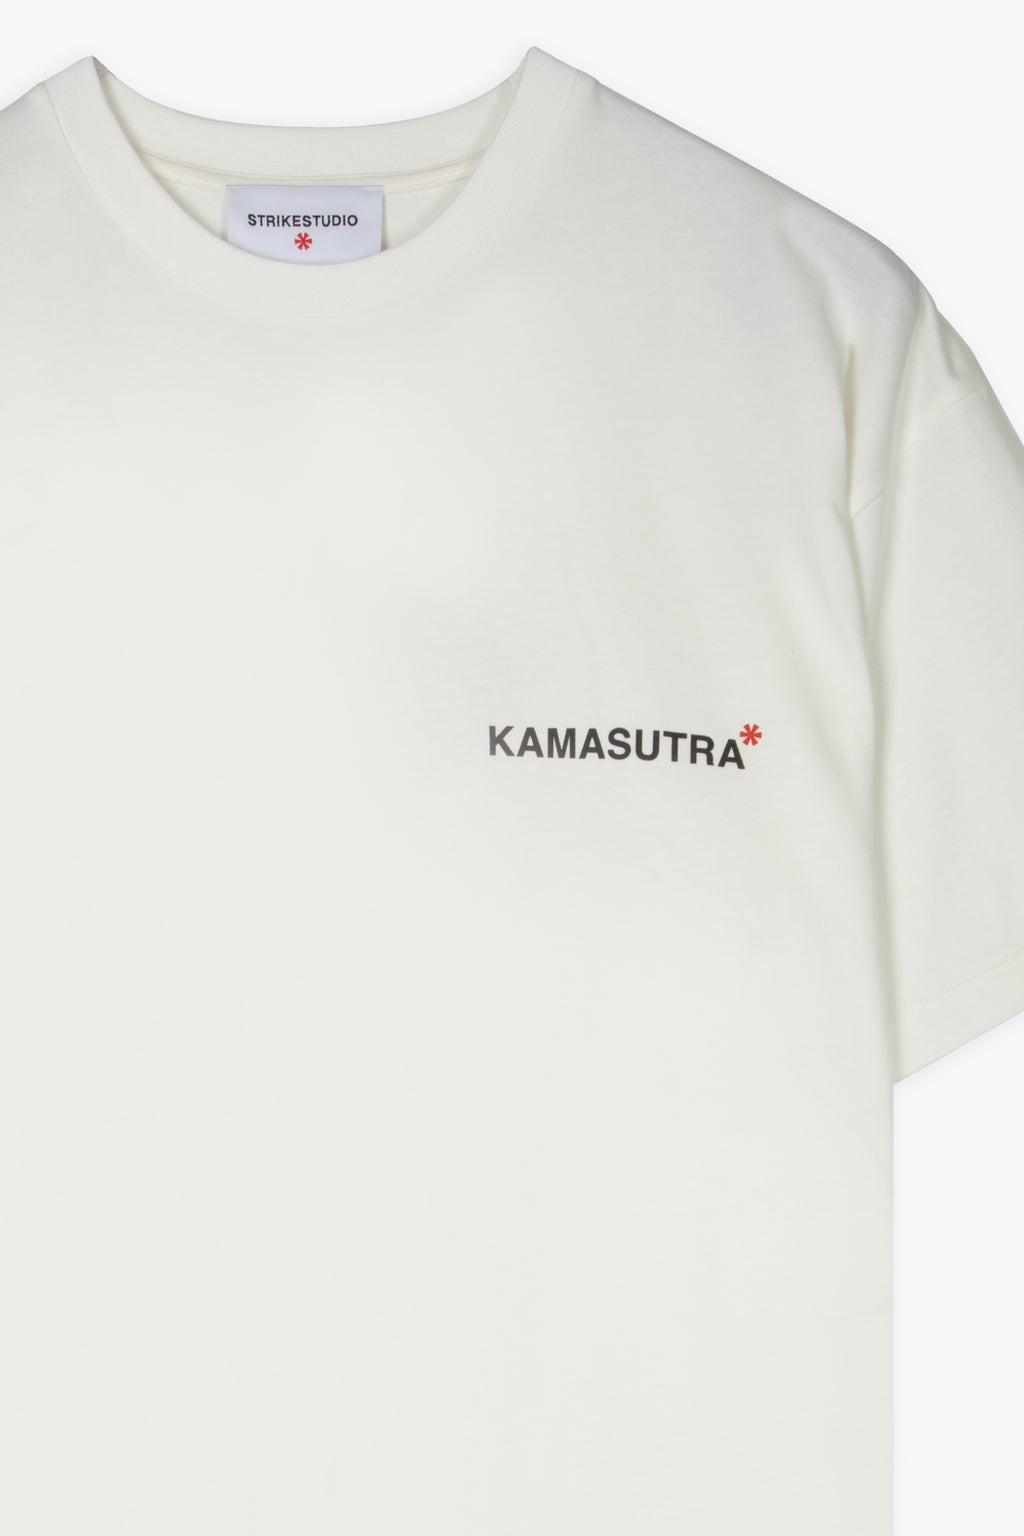 alt-image__White-cotton-t-shirt-with-front-print-Kamasutra-and-back-print-logo